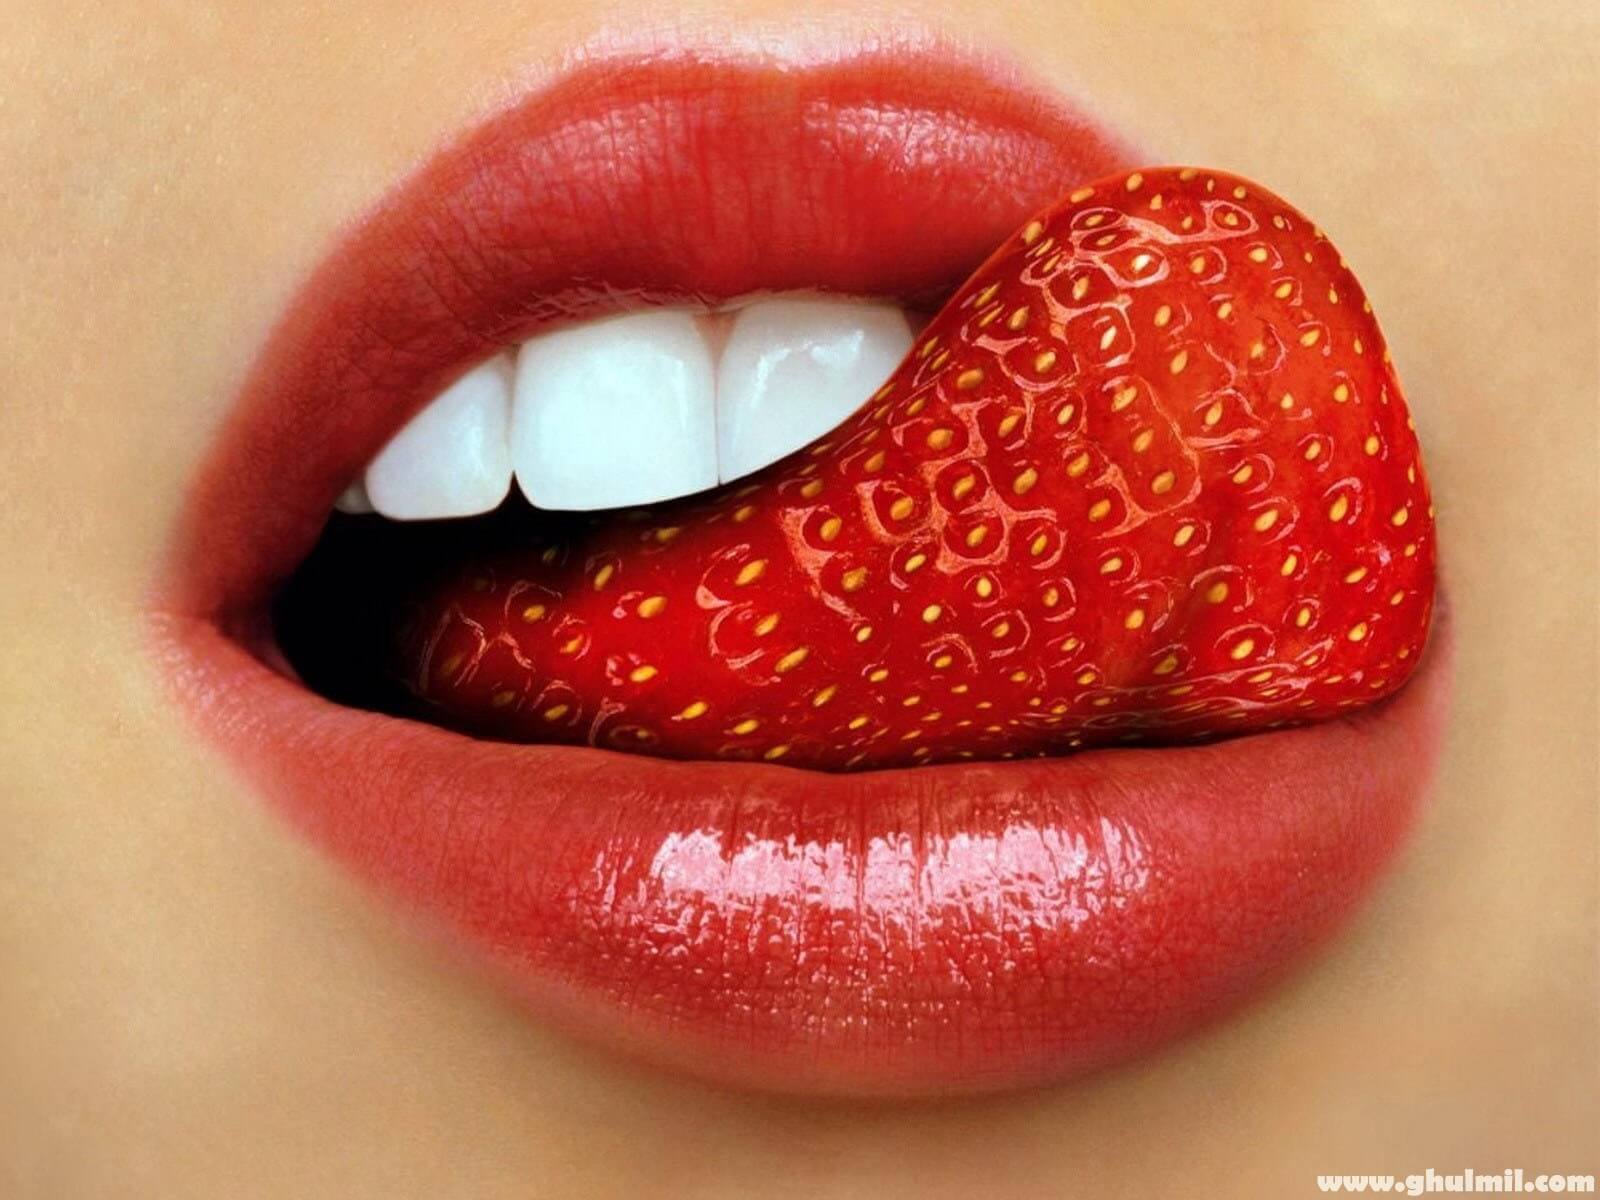 Lips Wallpaper - Lips With Strawberry Tongue - HD Wallpaper 